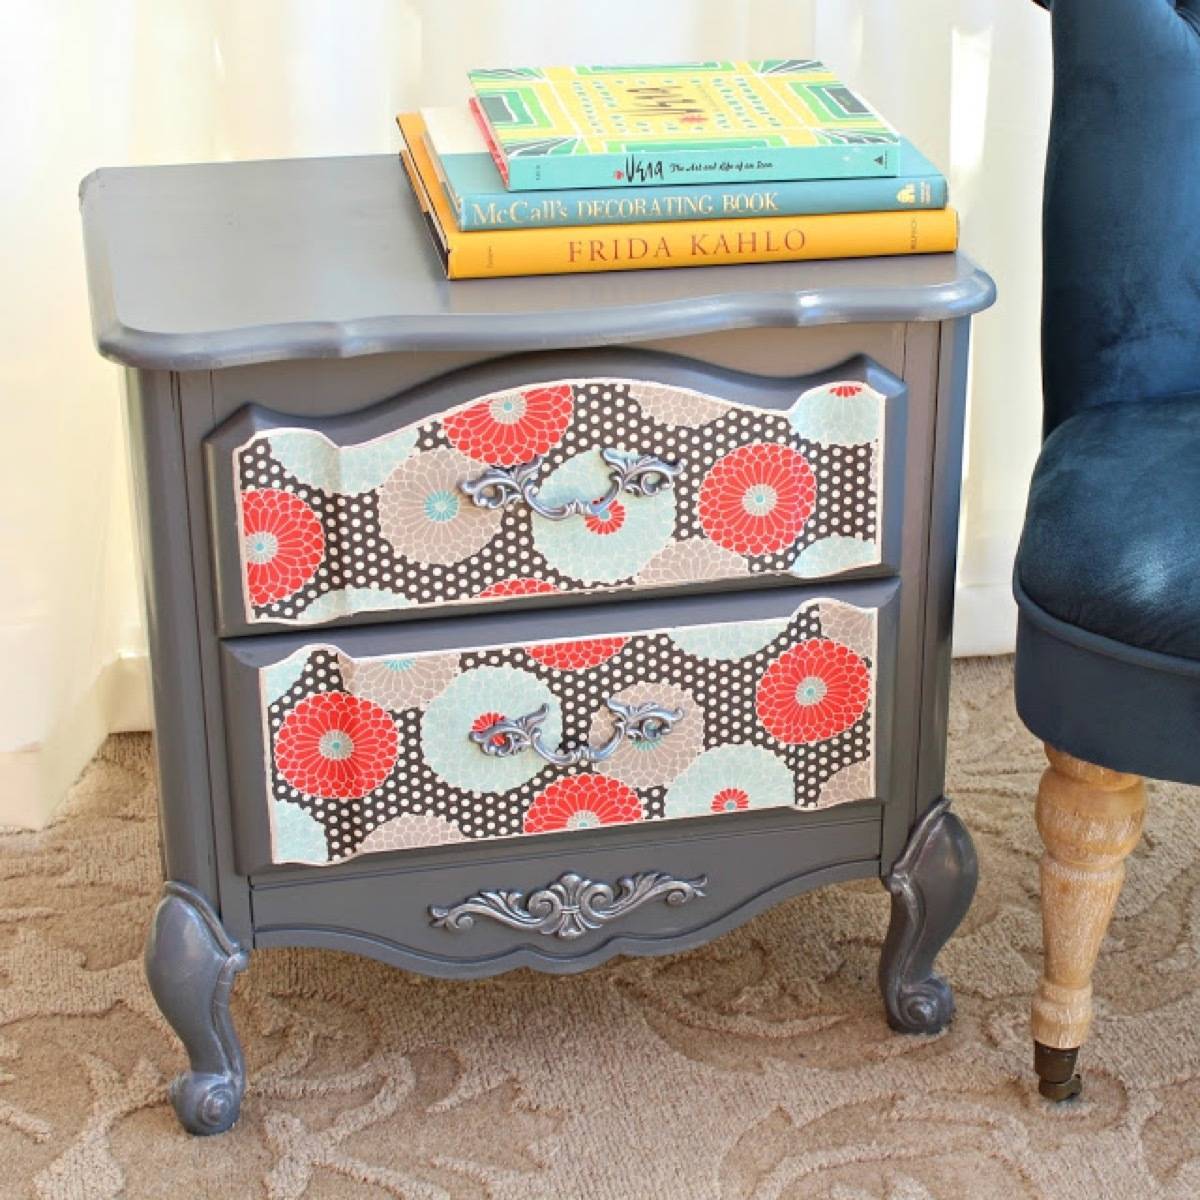 99 ways to use fabric to decorate your home | Updated nightstand